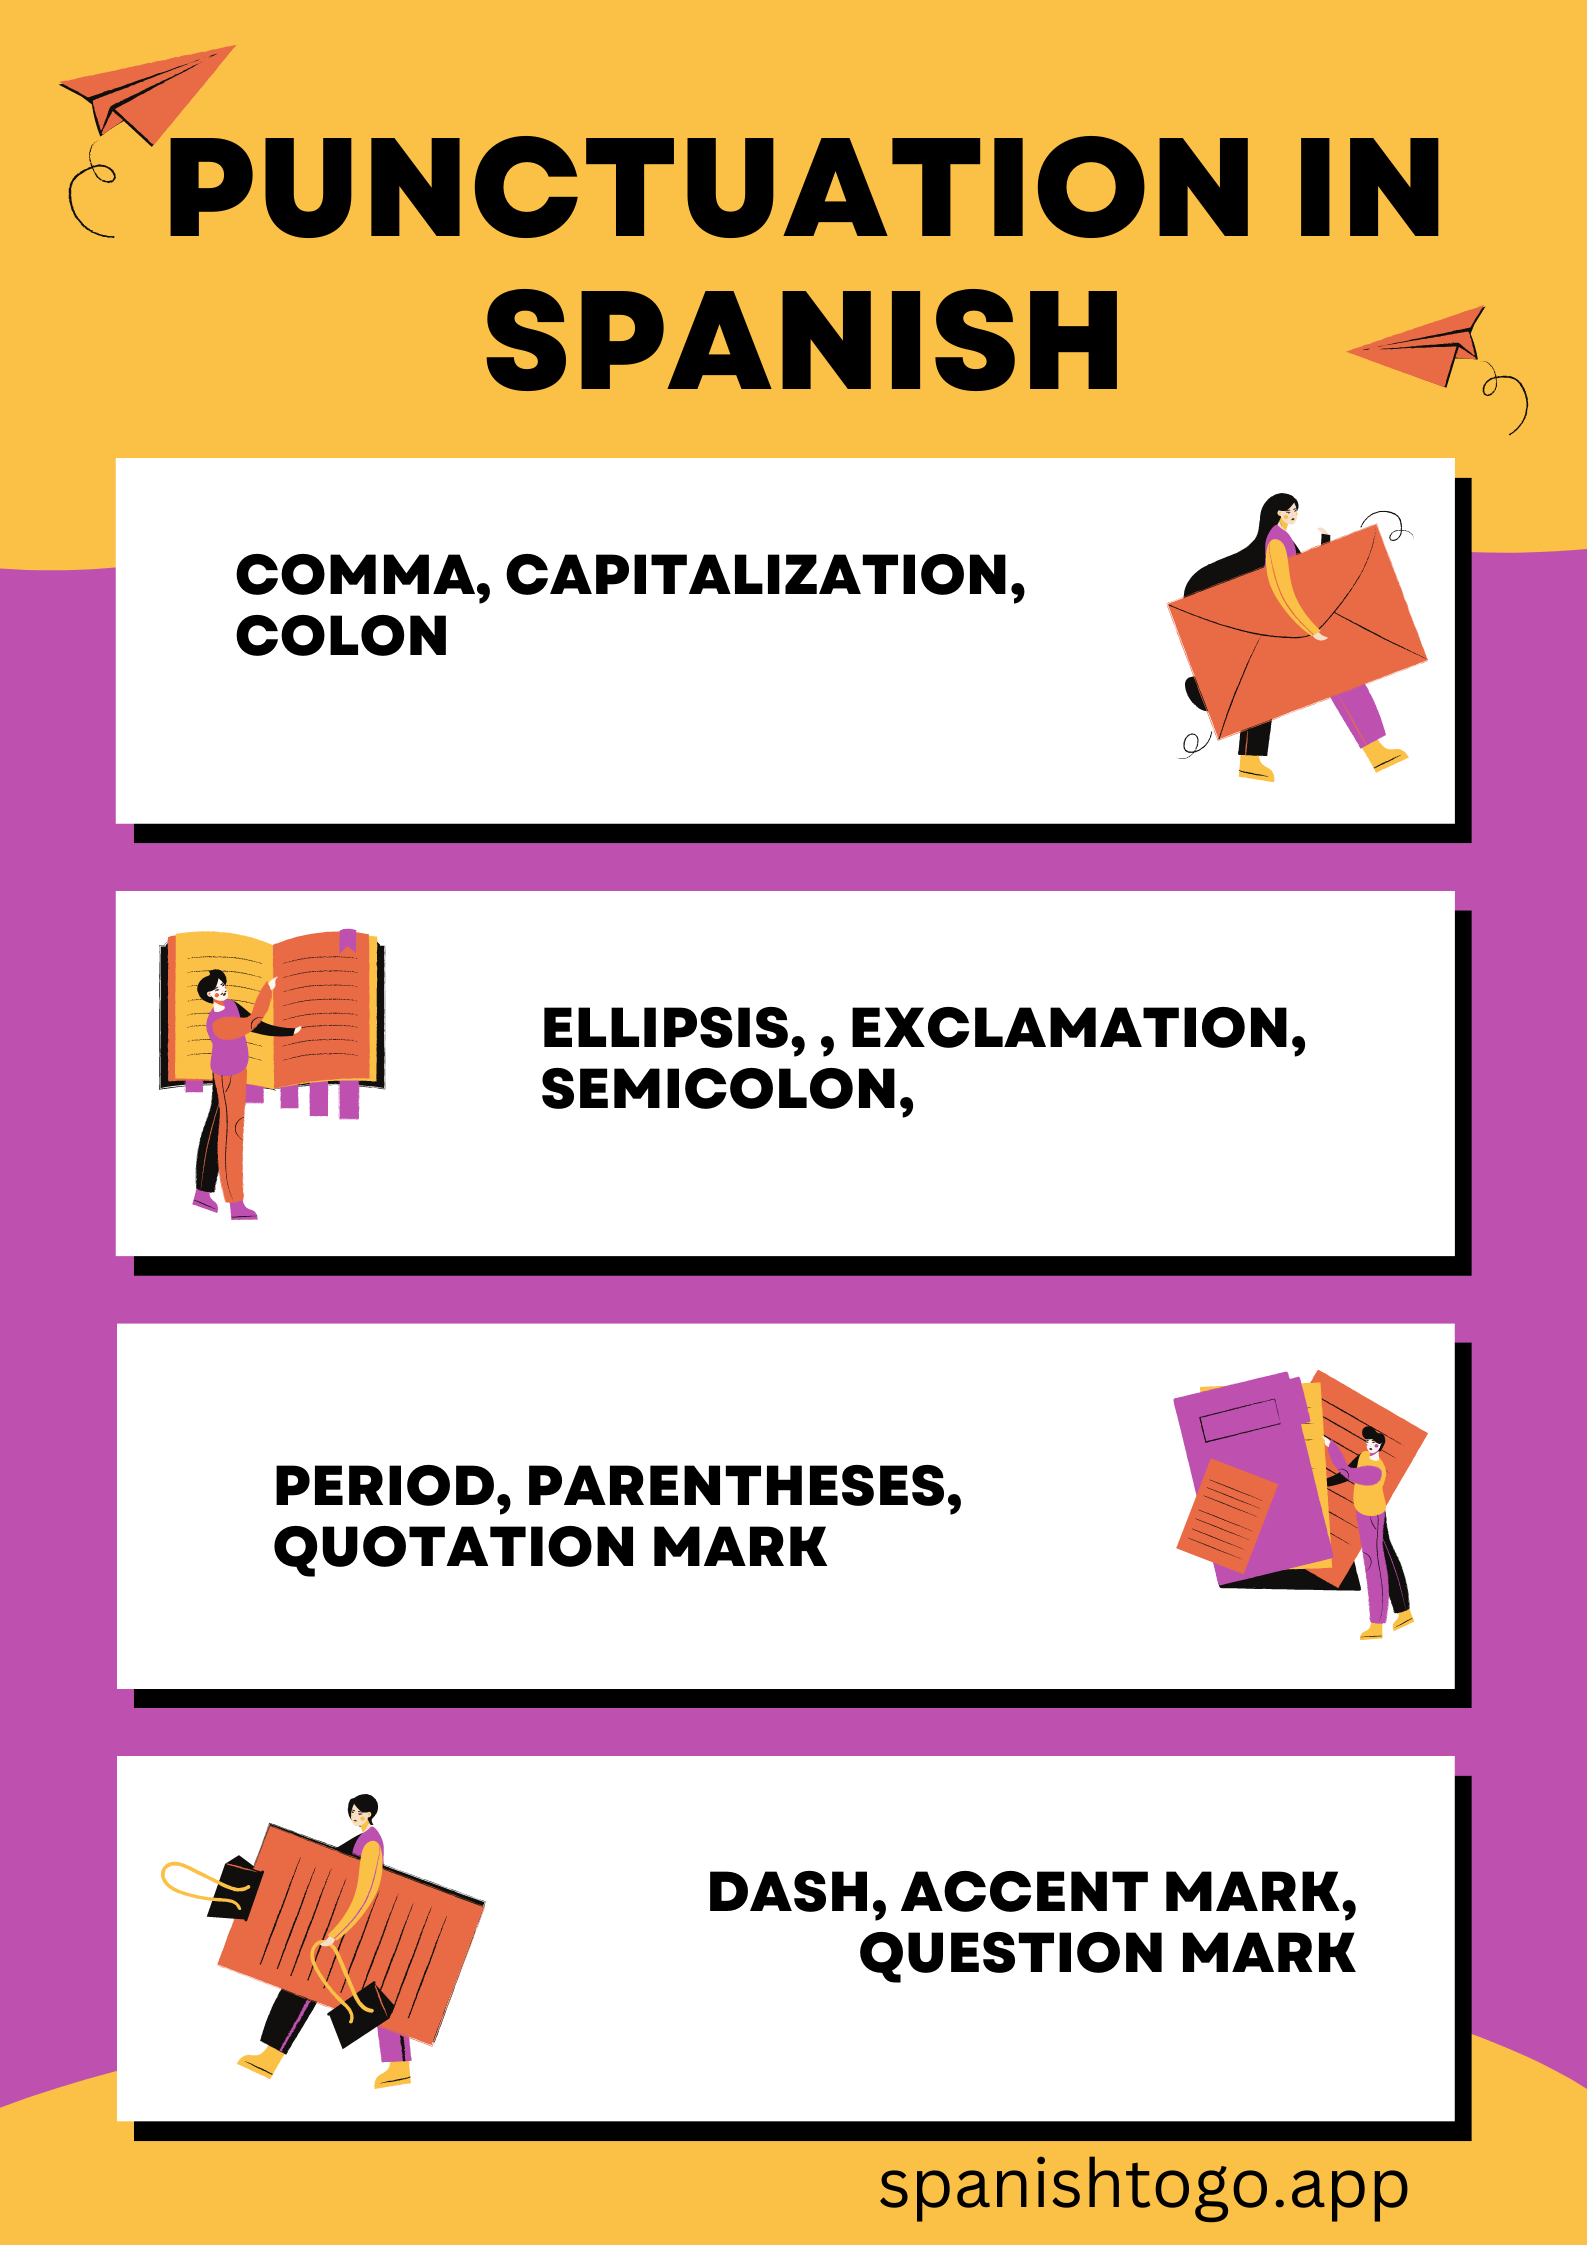 Punctuation Rules in Spanish